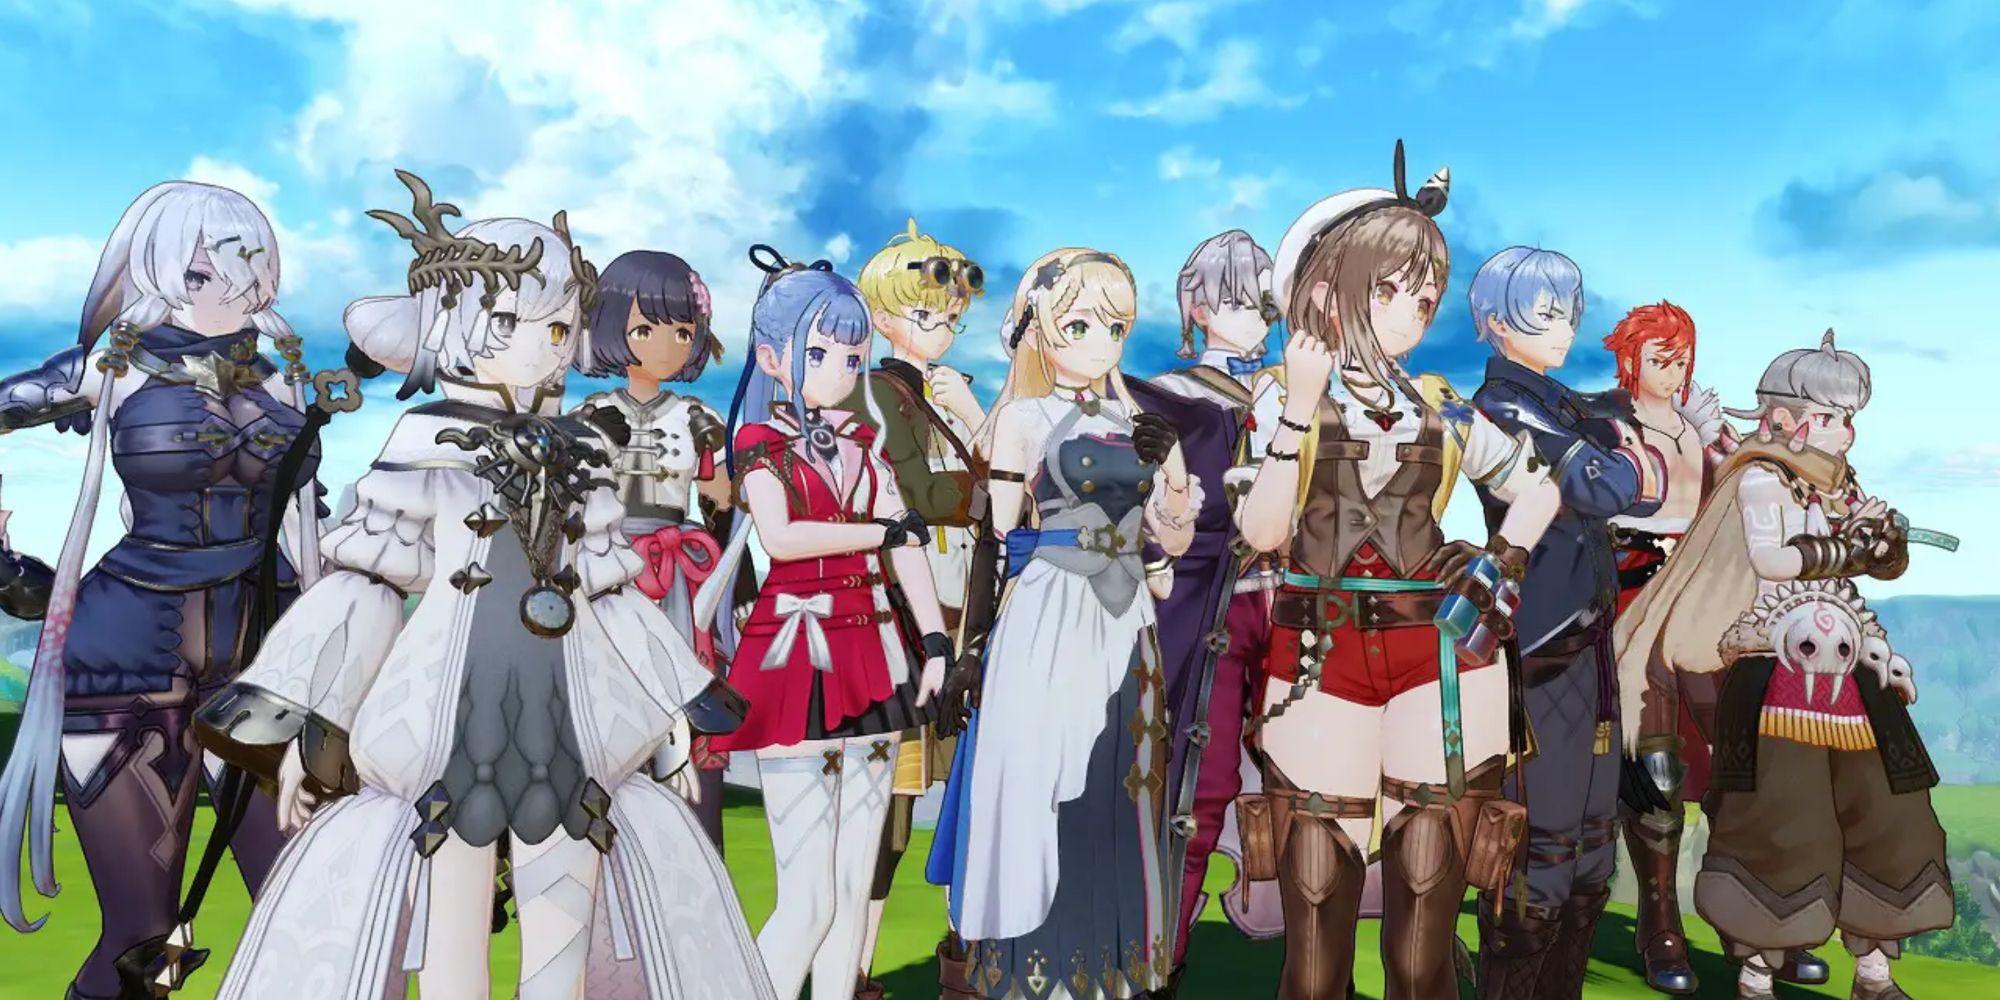 An image of all 11 playable characters in Atelier Ryza 3: Alchemist of the End & the Secret Key standing together looking ahead.